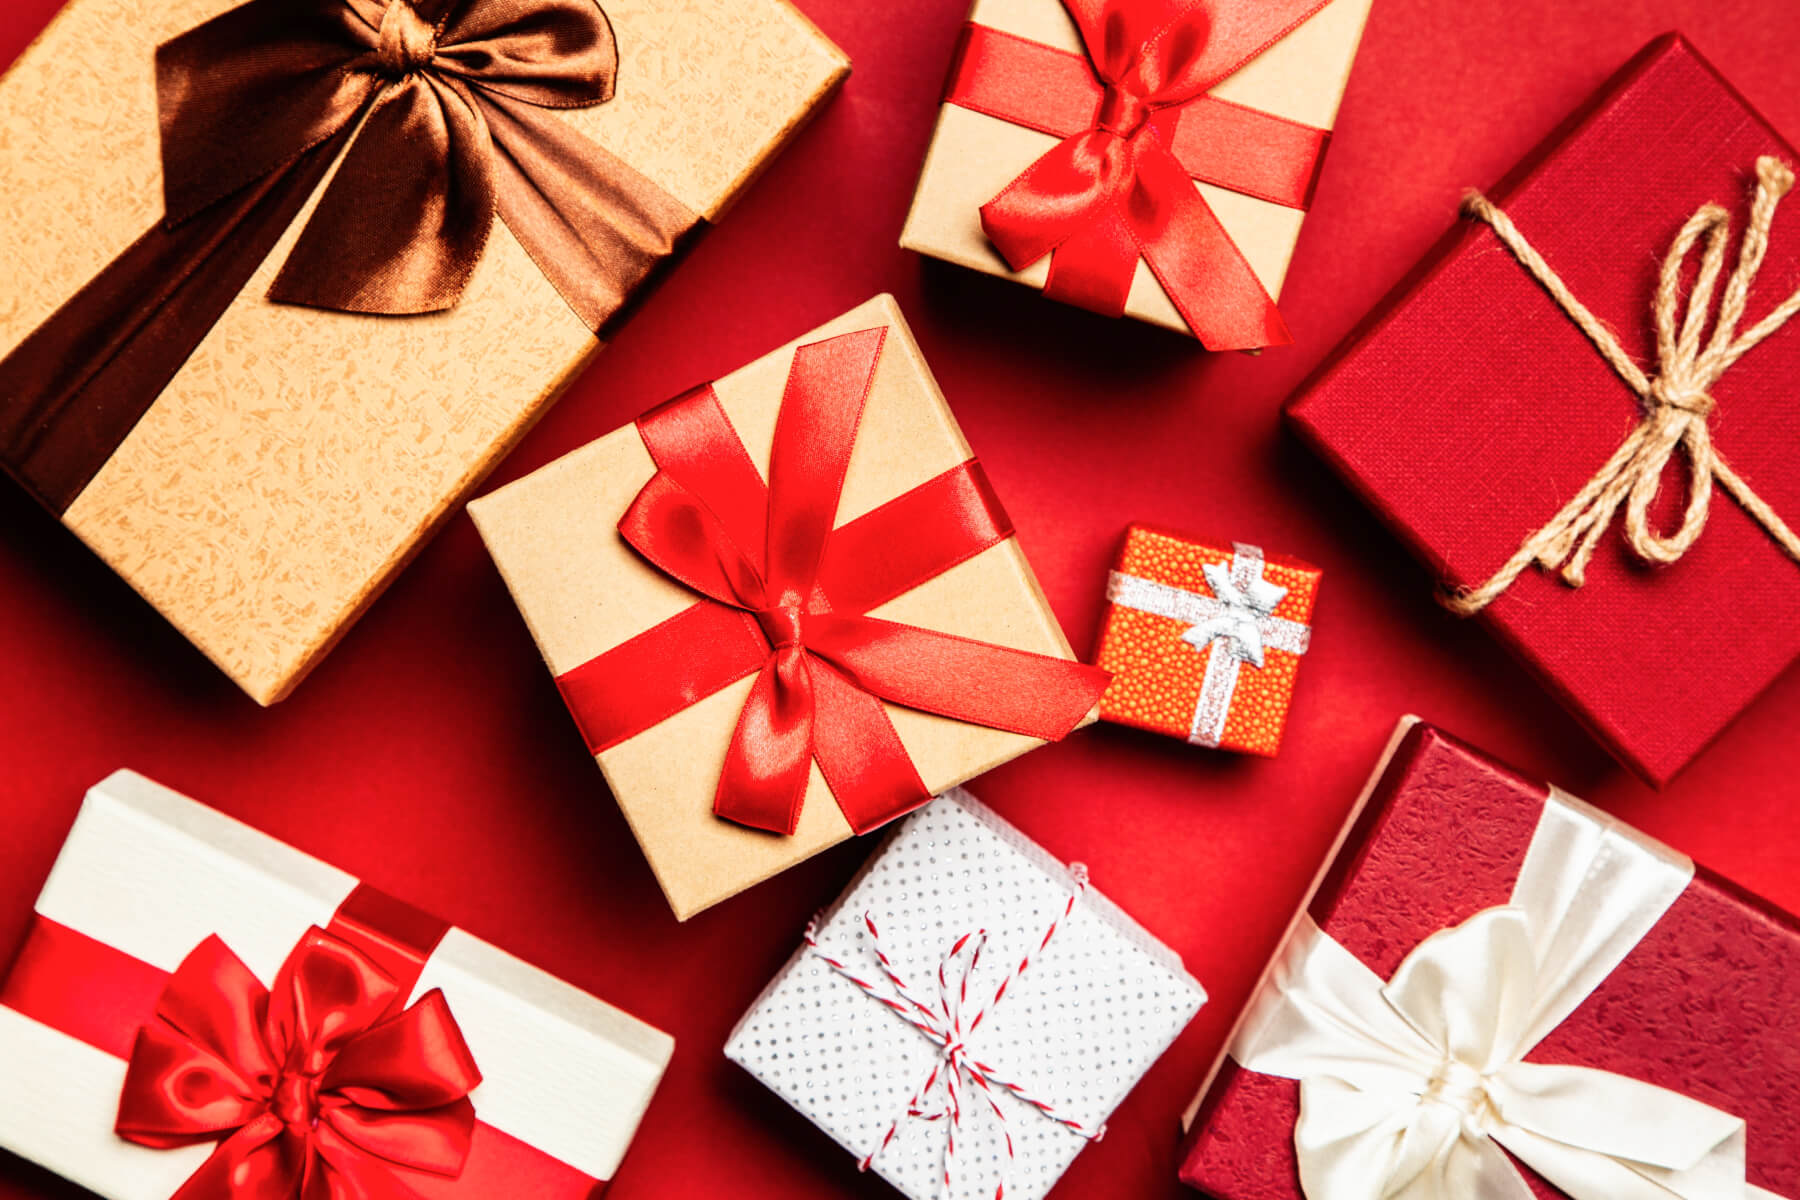 Overhead photograph of gifts on red background.